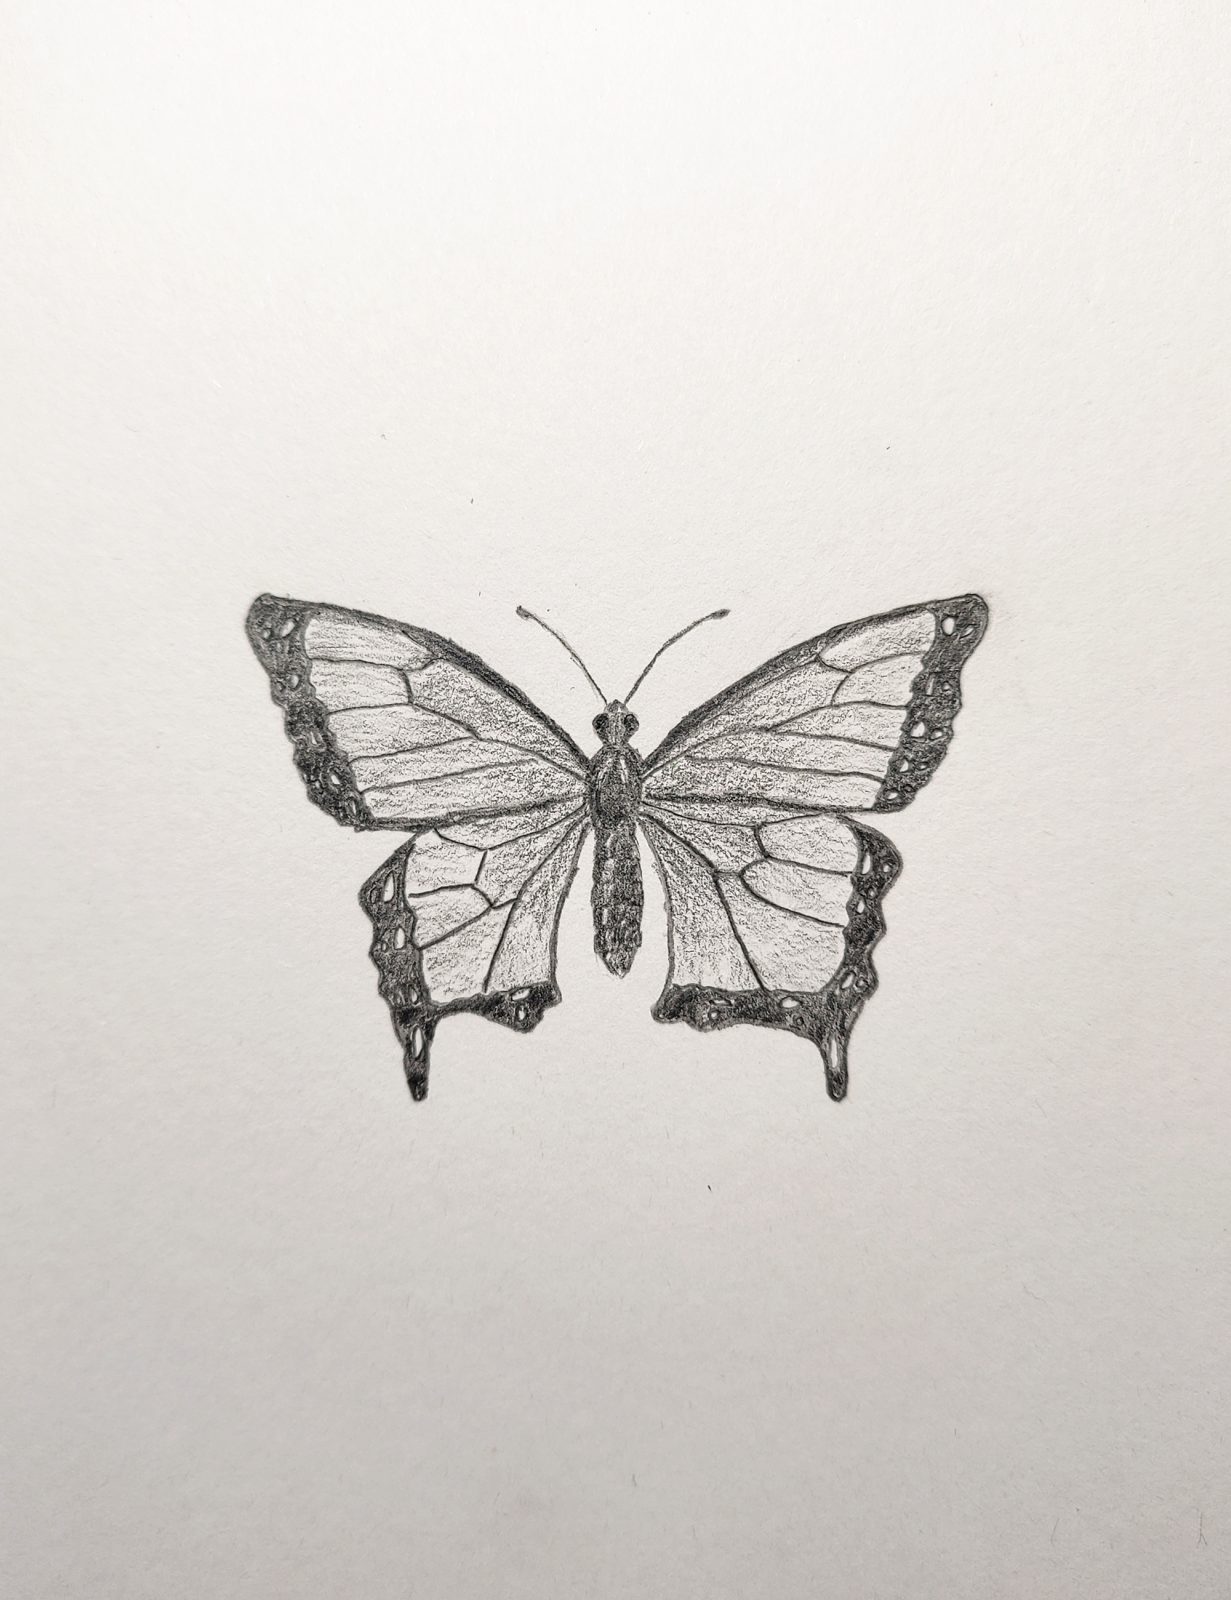 How to Draw a Butterfly Easy Step by Step